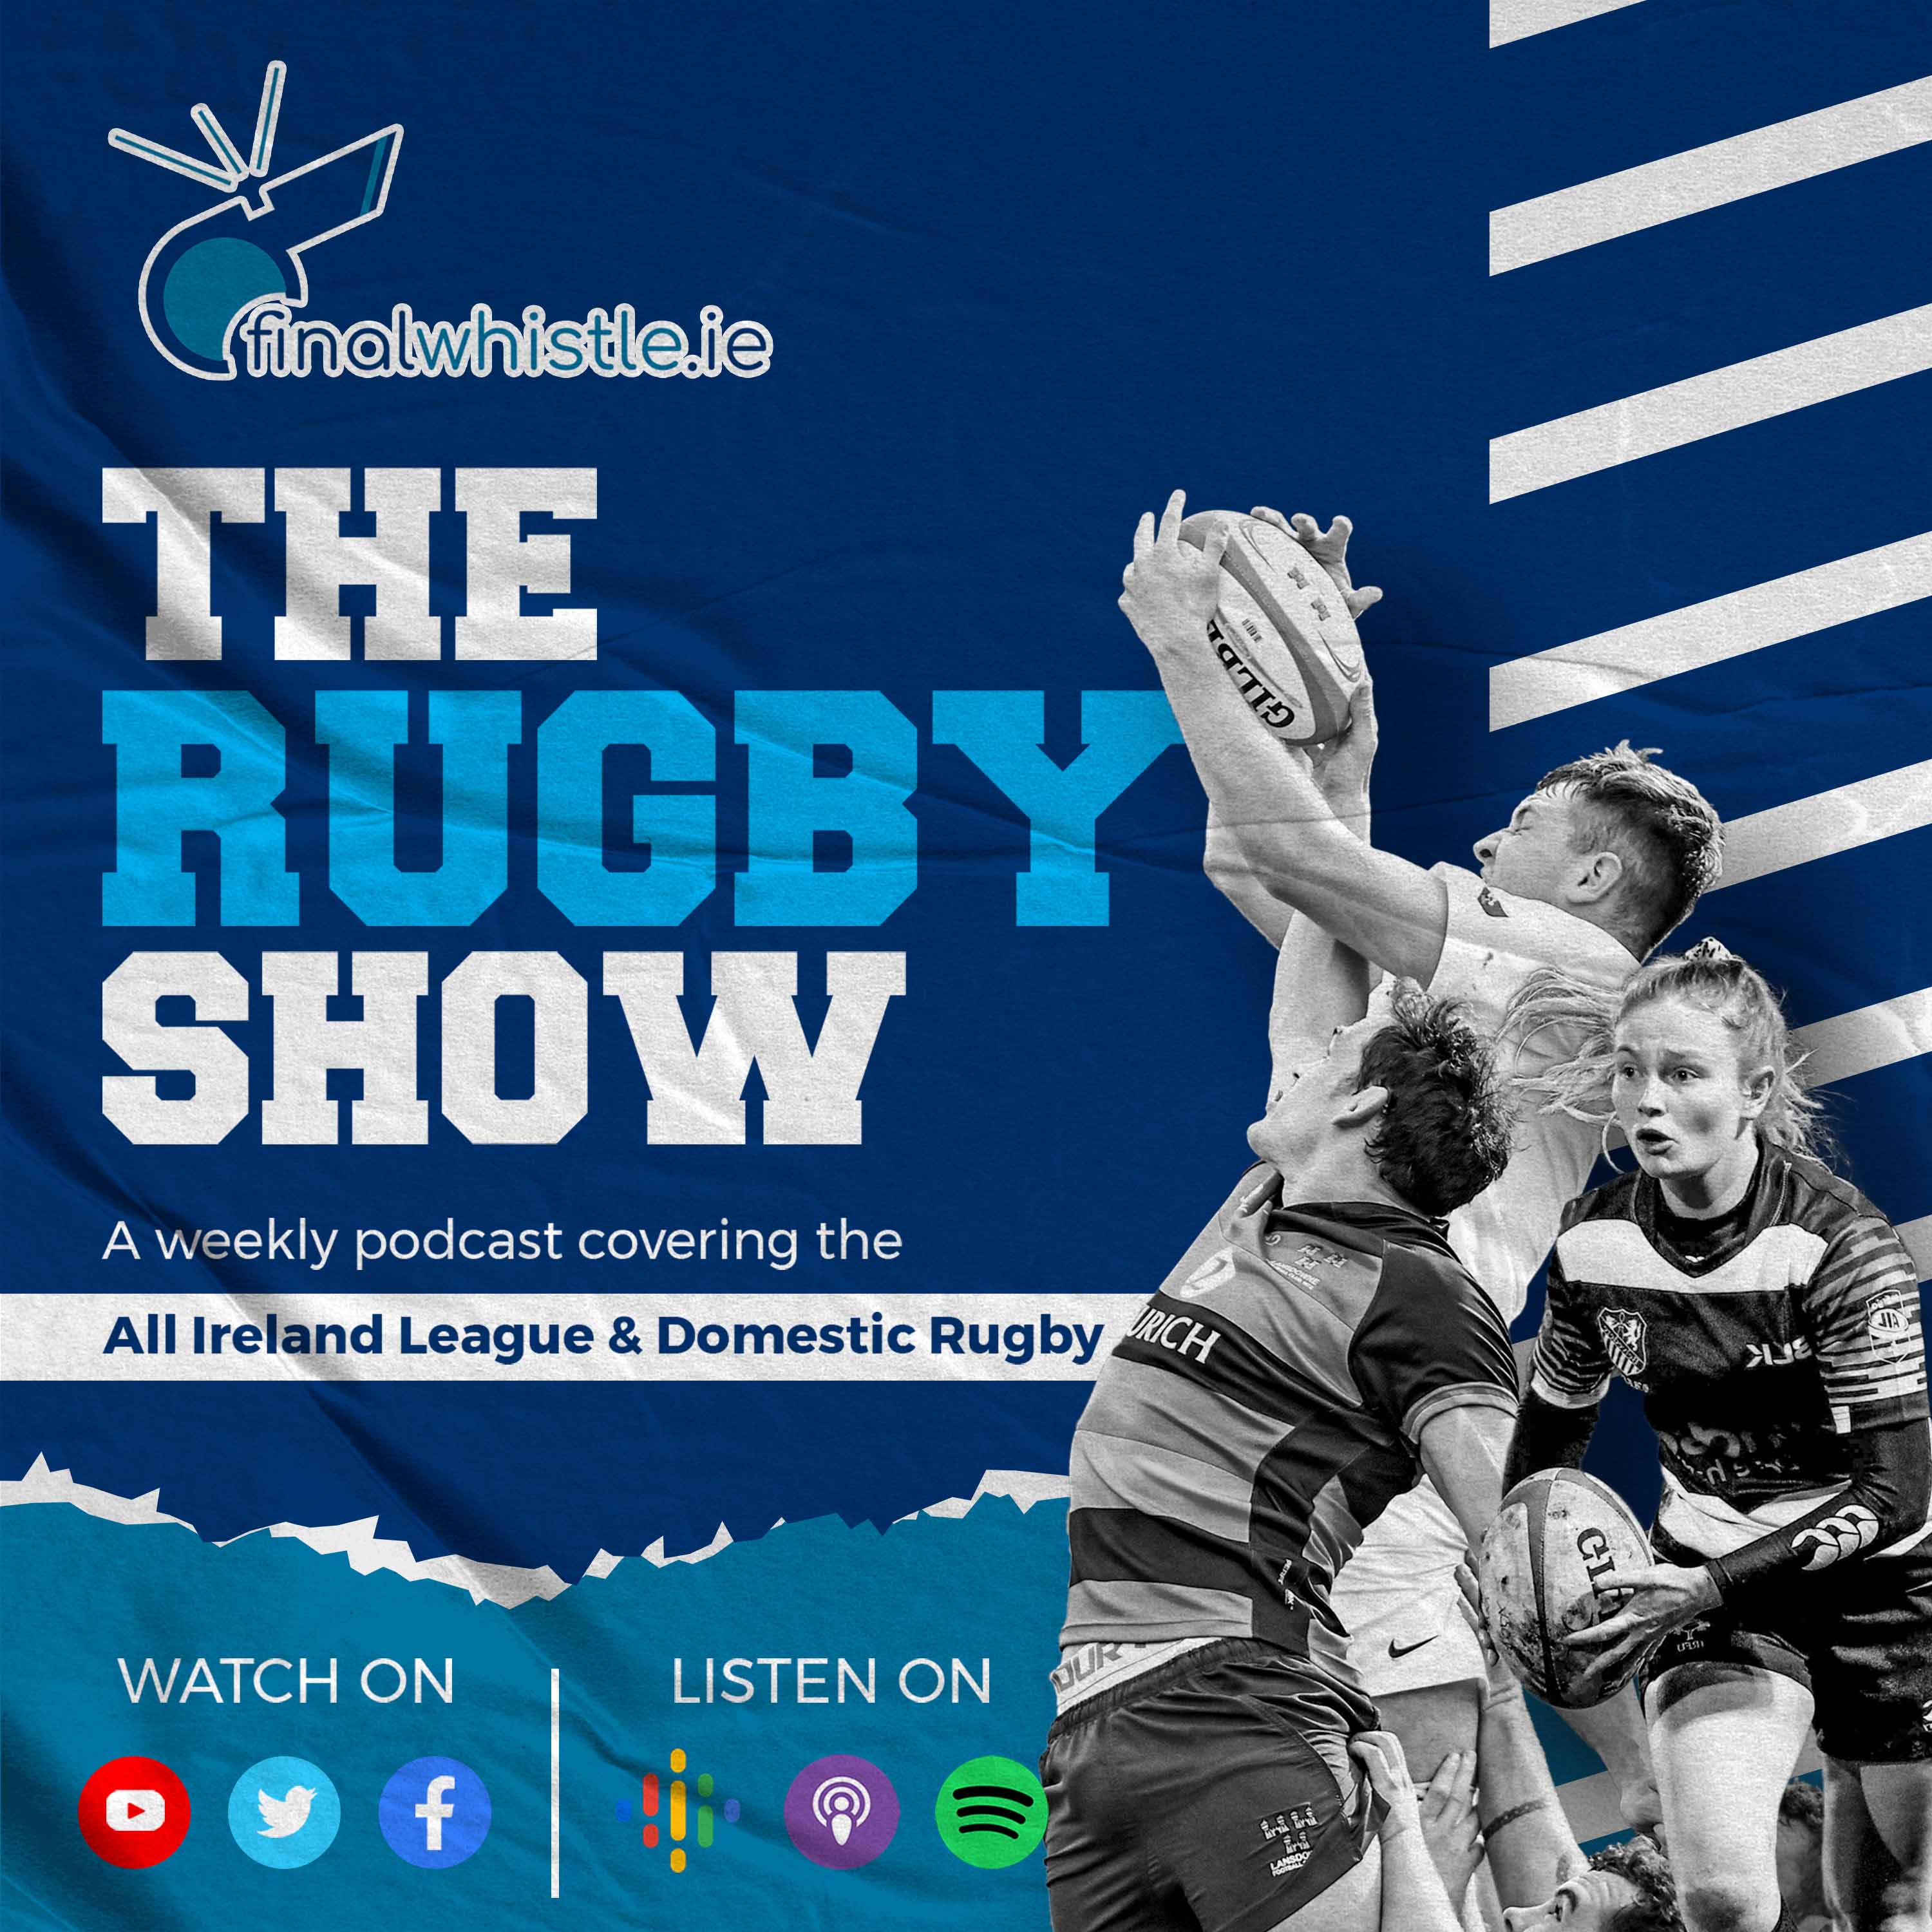 Artwork for Final Whistle Rugby